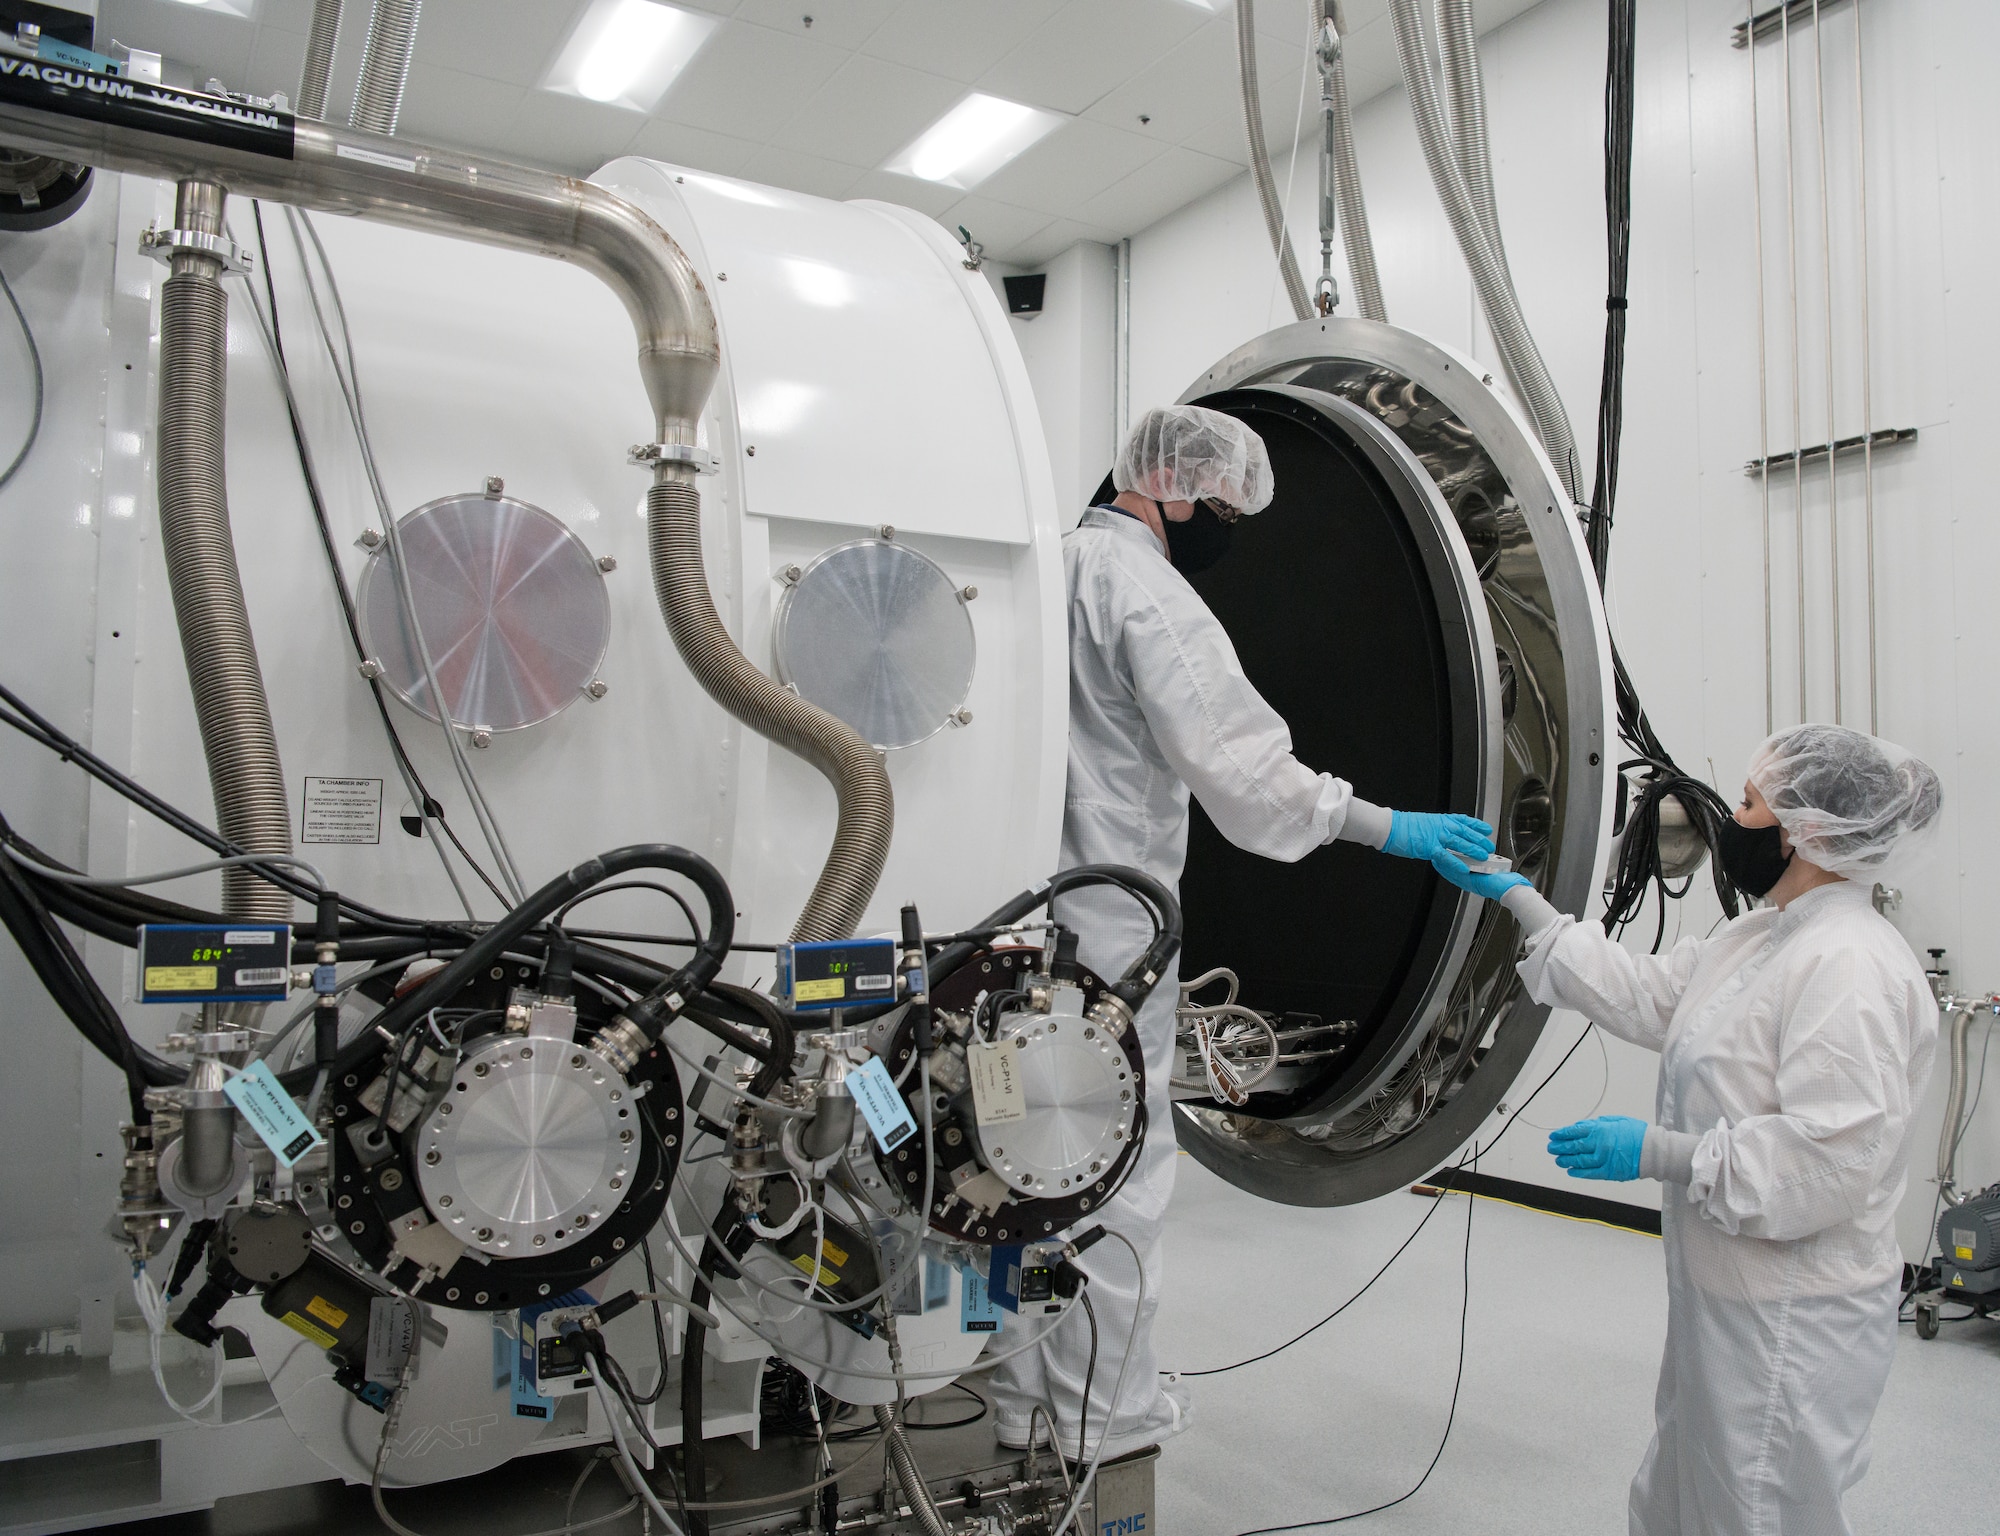 Kellye Burns, right, a space test engineer, hands a material sample to Eric D'Ambro, a test operations engineer, that will be tested in a Space Asset Resilience thermal vacuum chamber, Aug. 3, 2020, at Arnold Air Force Base, Tenn. Materials and space systems can be subjected to the natural and induced threat sources, such as protons, electrons, solar, atomic oxygen, thruster ions, material outgassing and spacecraft charging.(U.S. Air Force photo by Jill Pickett)